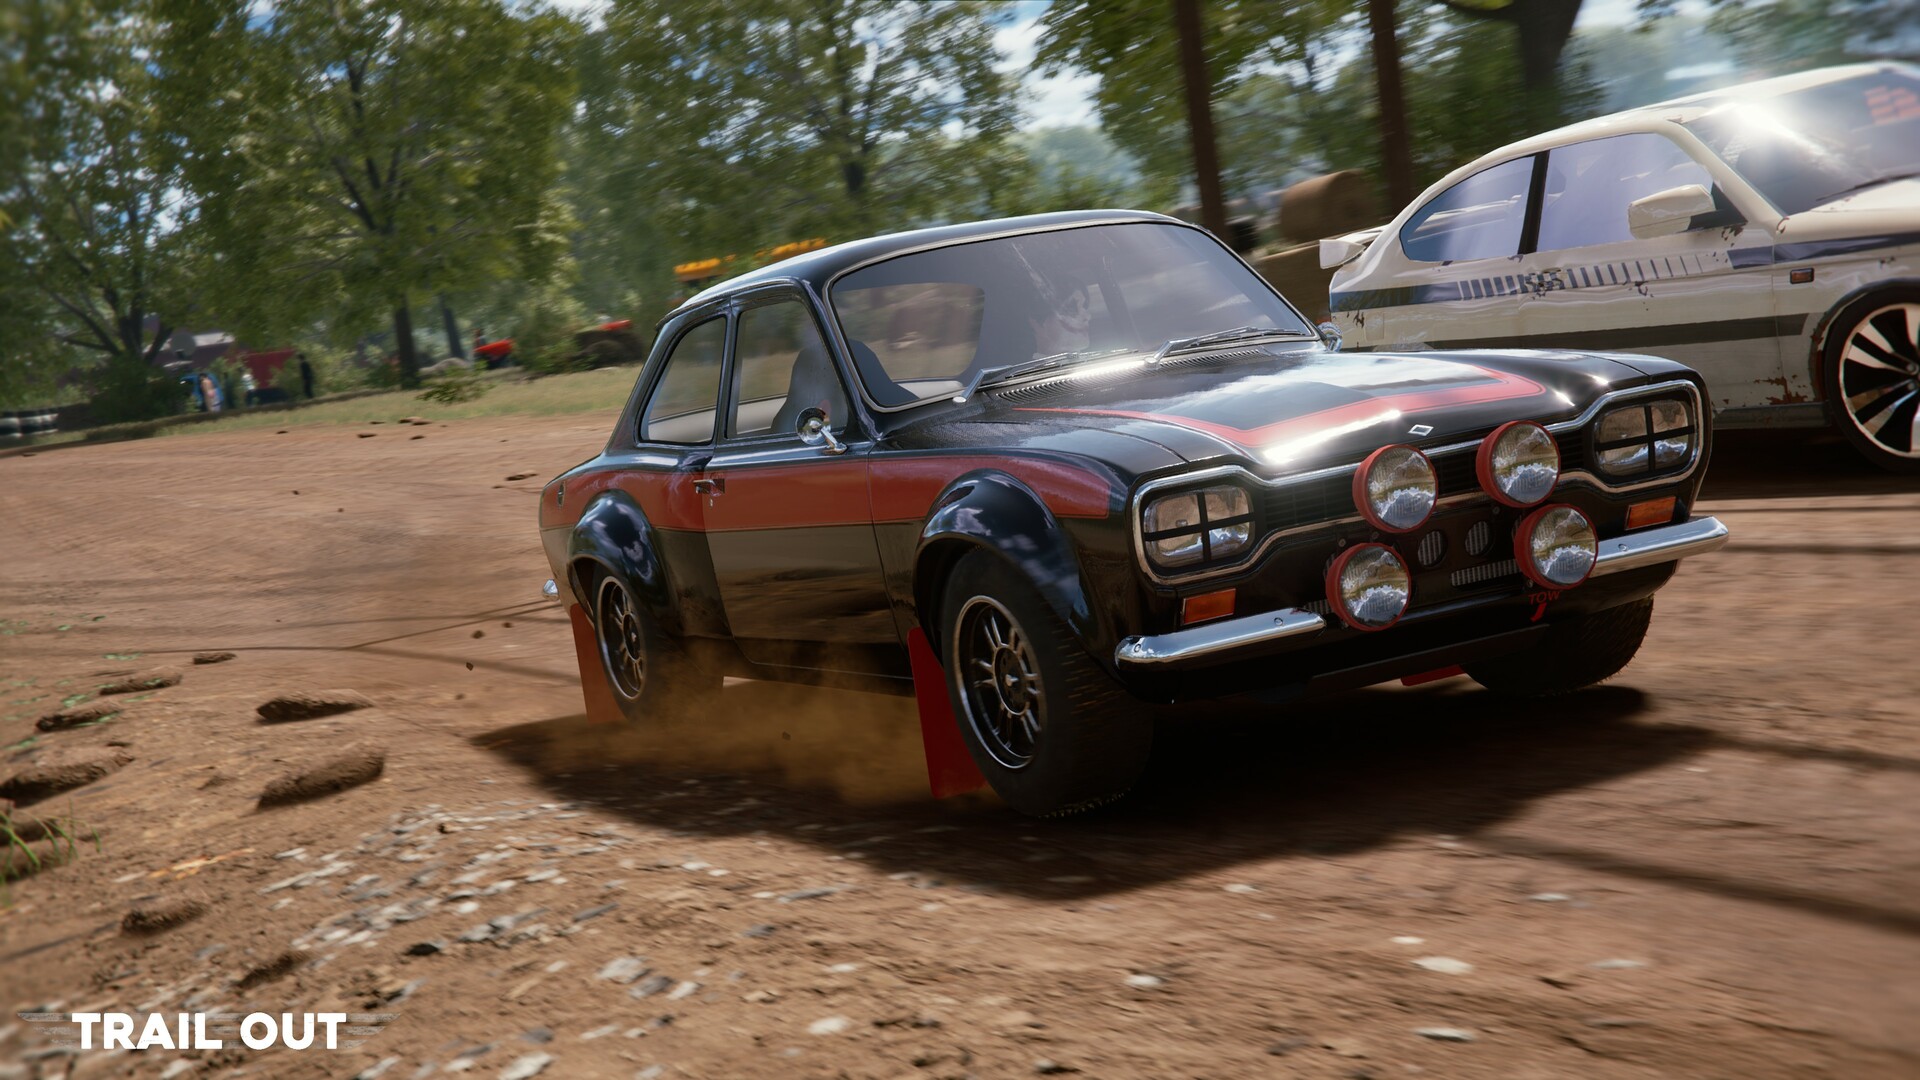 TRAIL OUT | Esport Rally Featured Screenshot #1